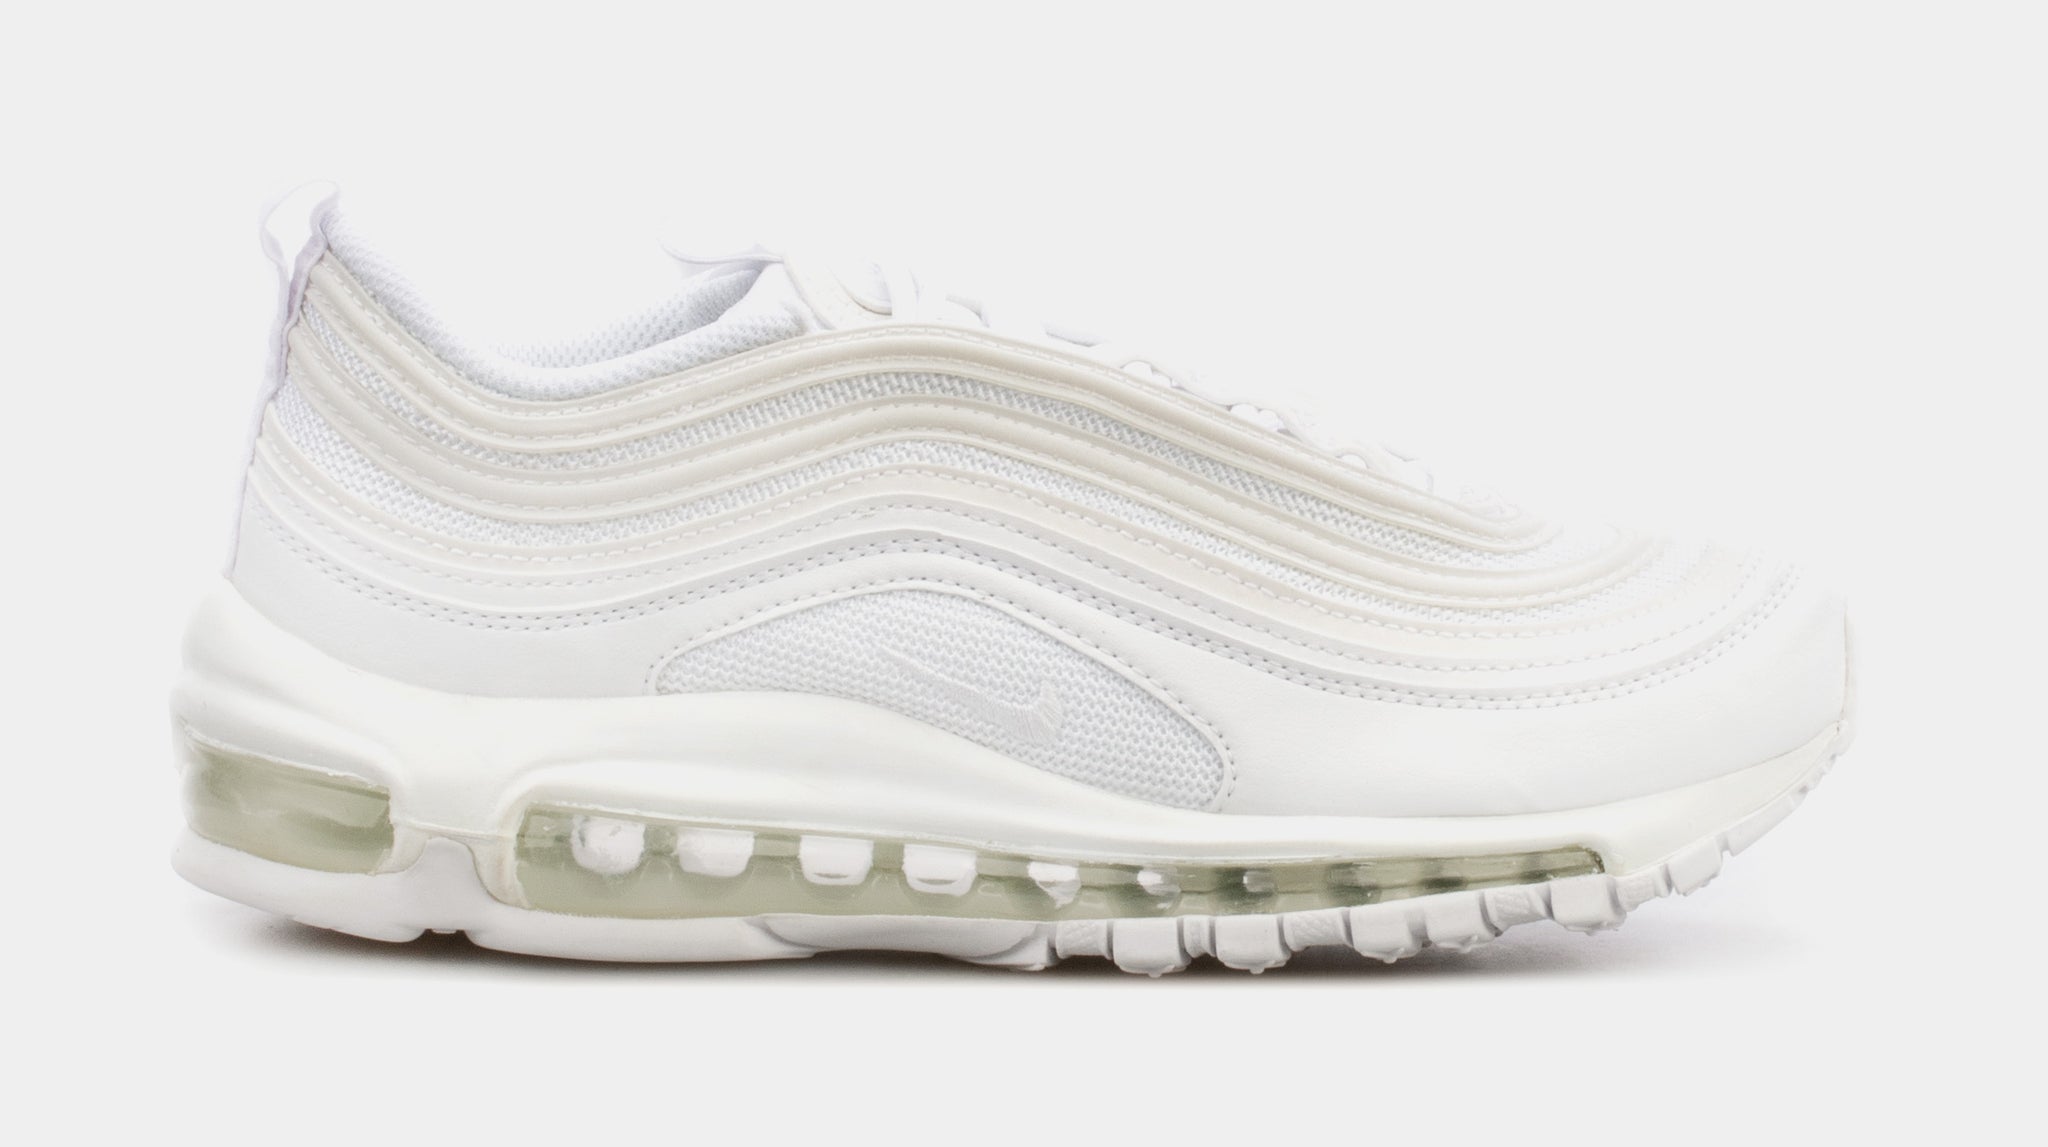 These Air Max 97s Look Like NBA All-Star Jerseys